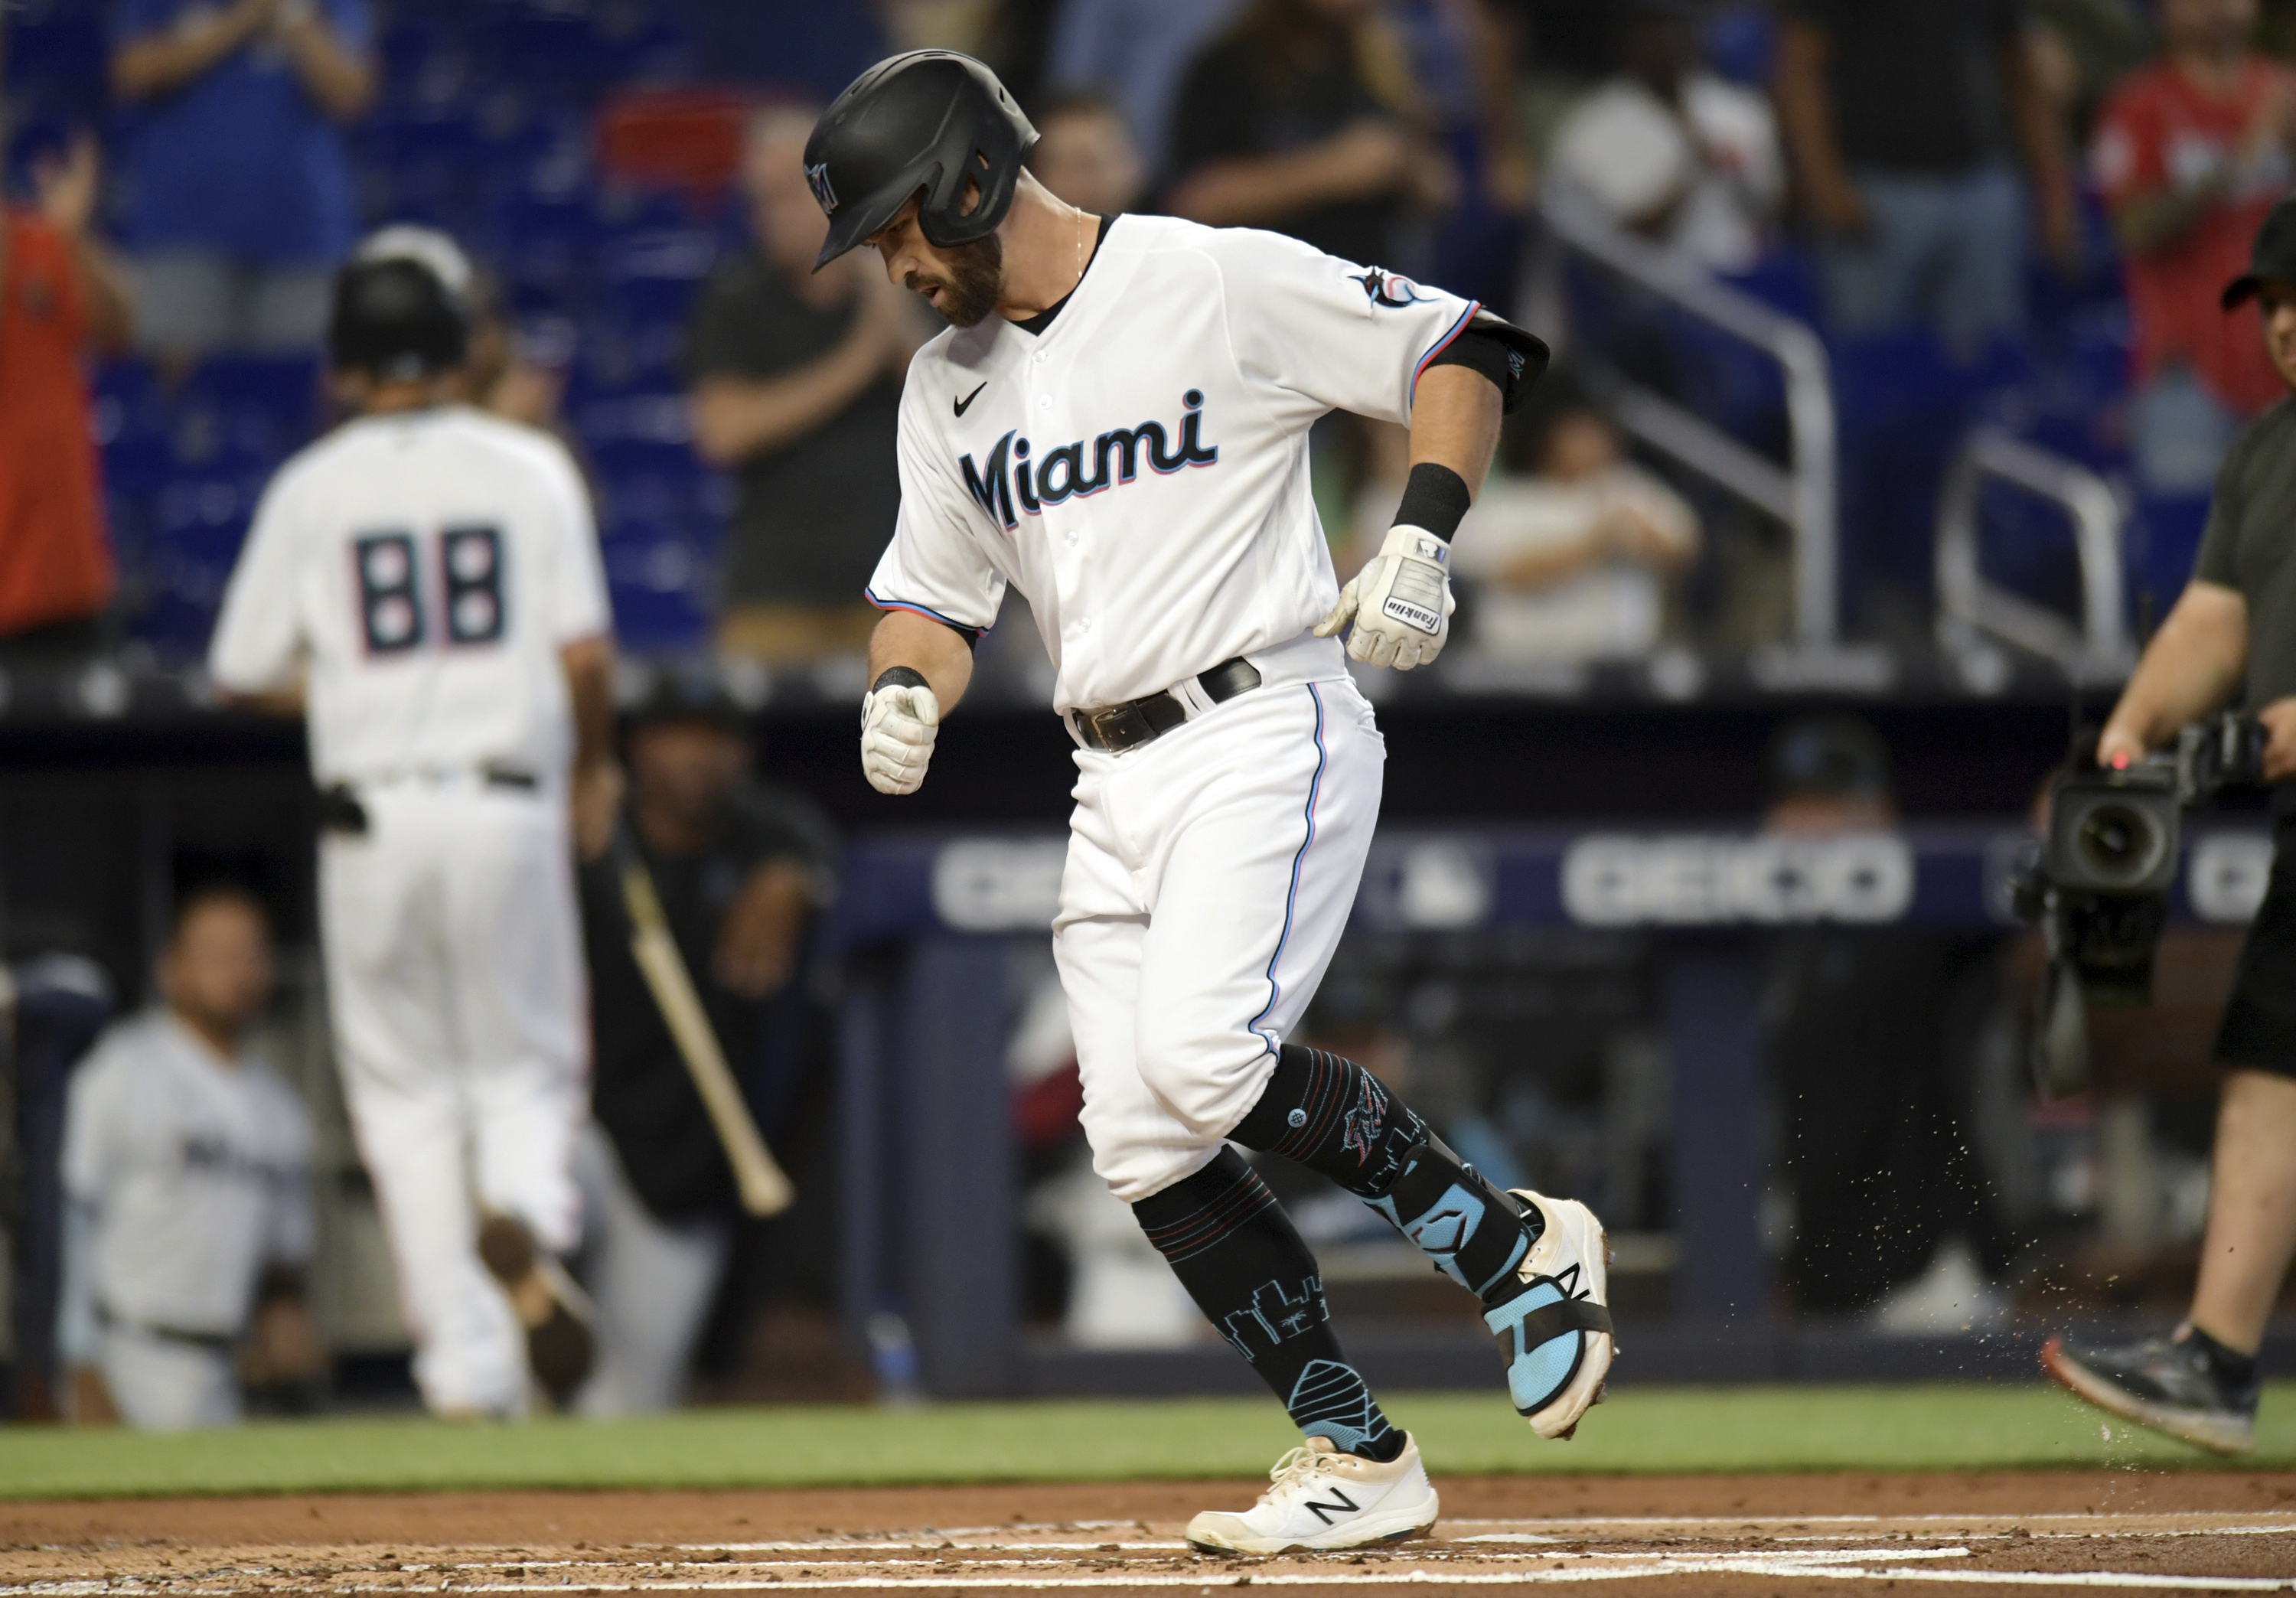 Homers from Burger and Chisholm in 8th lift Marlins to 11-5 win over Braves  - ABC News